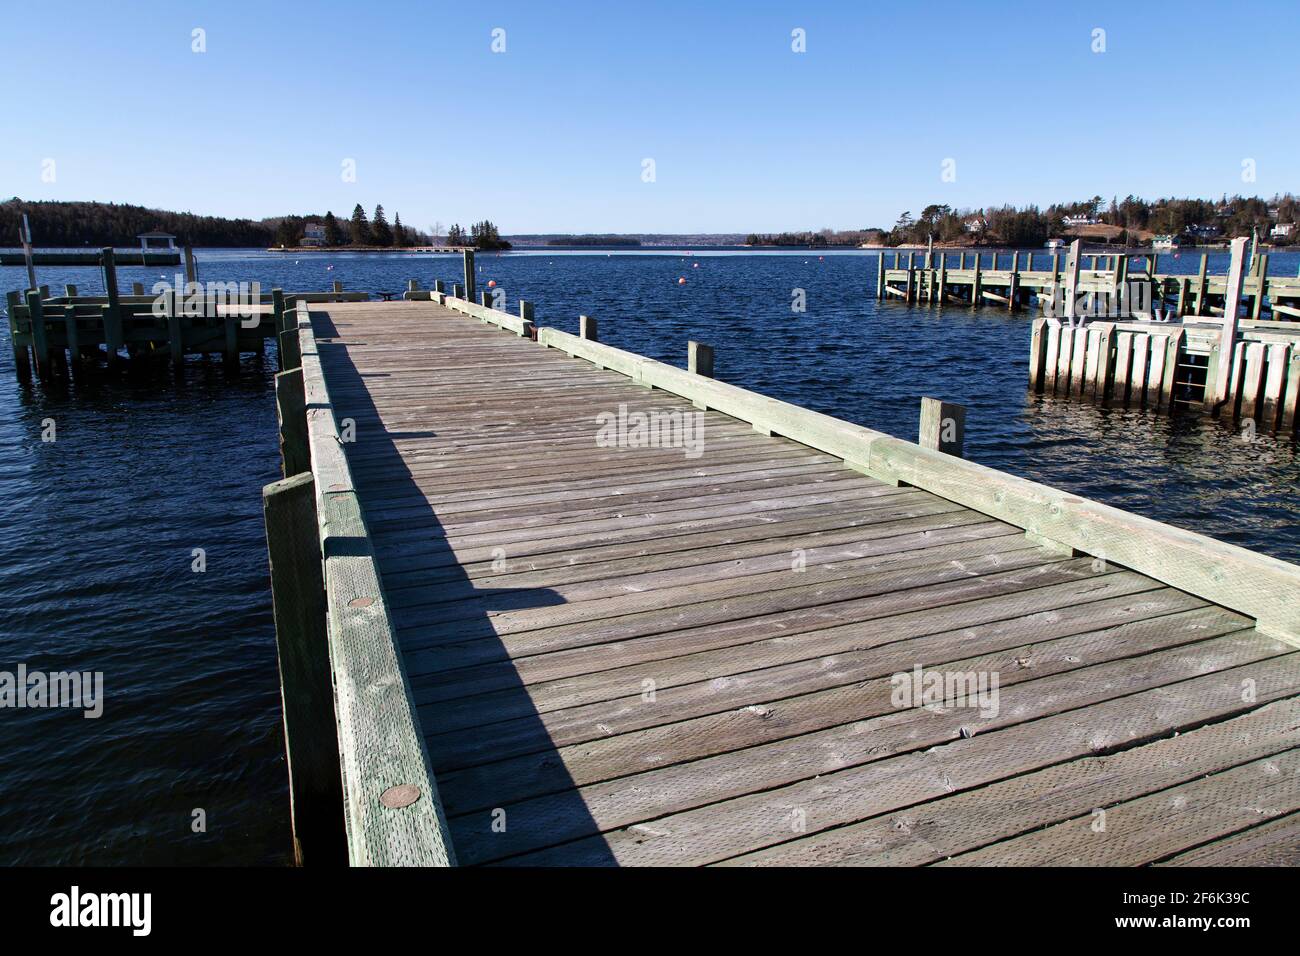 Wooden jetty at the waterfront in Chester, Nova Scotia, Canada. The jetty juts into the water of the harbour. Stock Photo